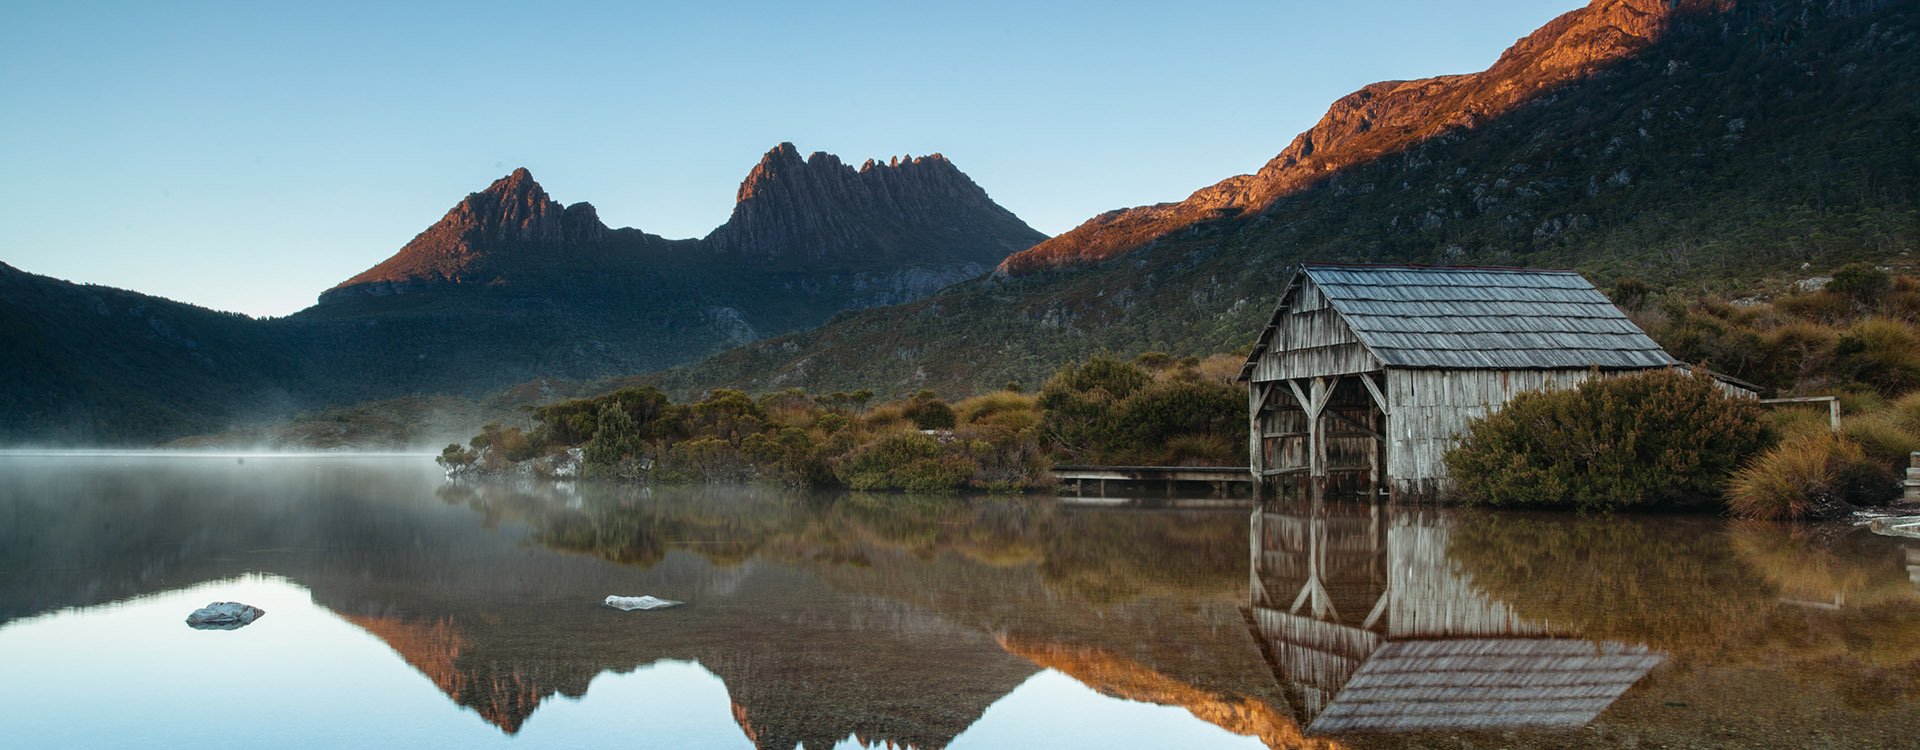 Mountain Cradlle National Park in Tasmania. Mirror reflections in peaceful still waters of lake Dove